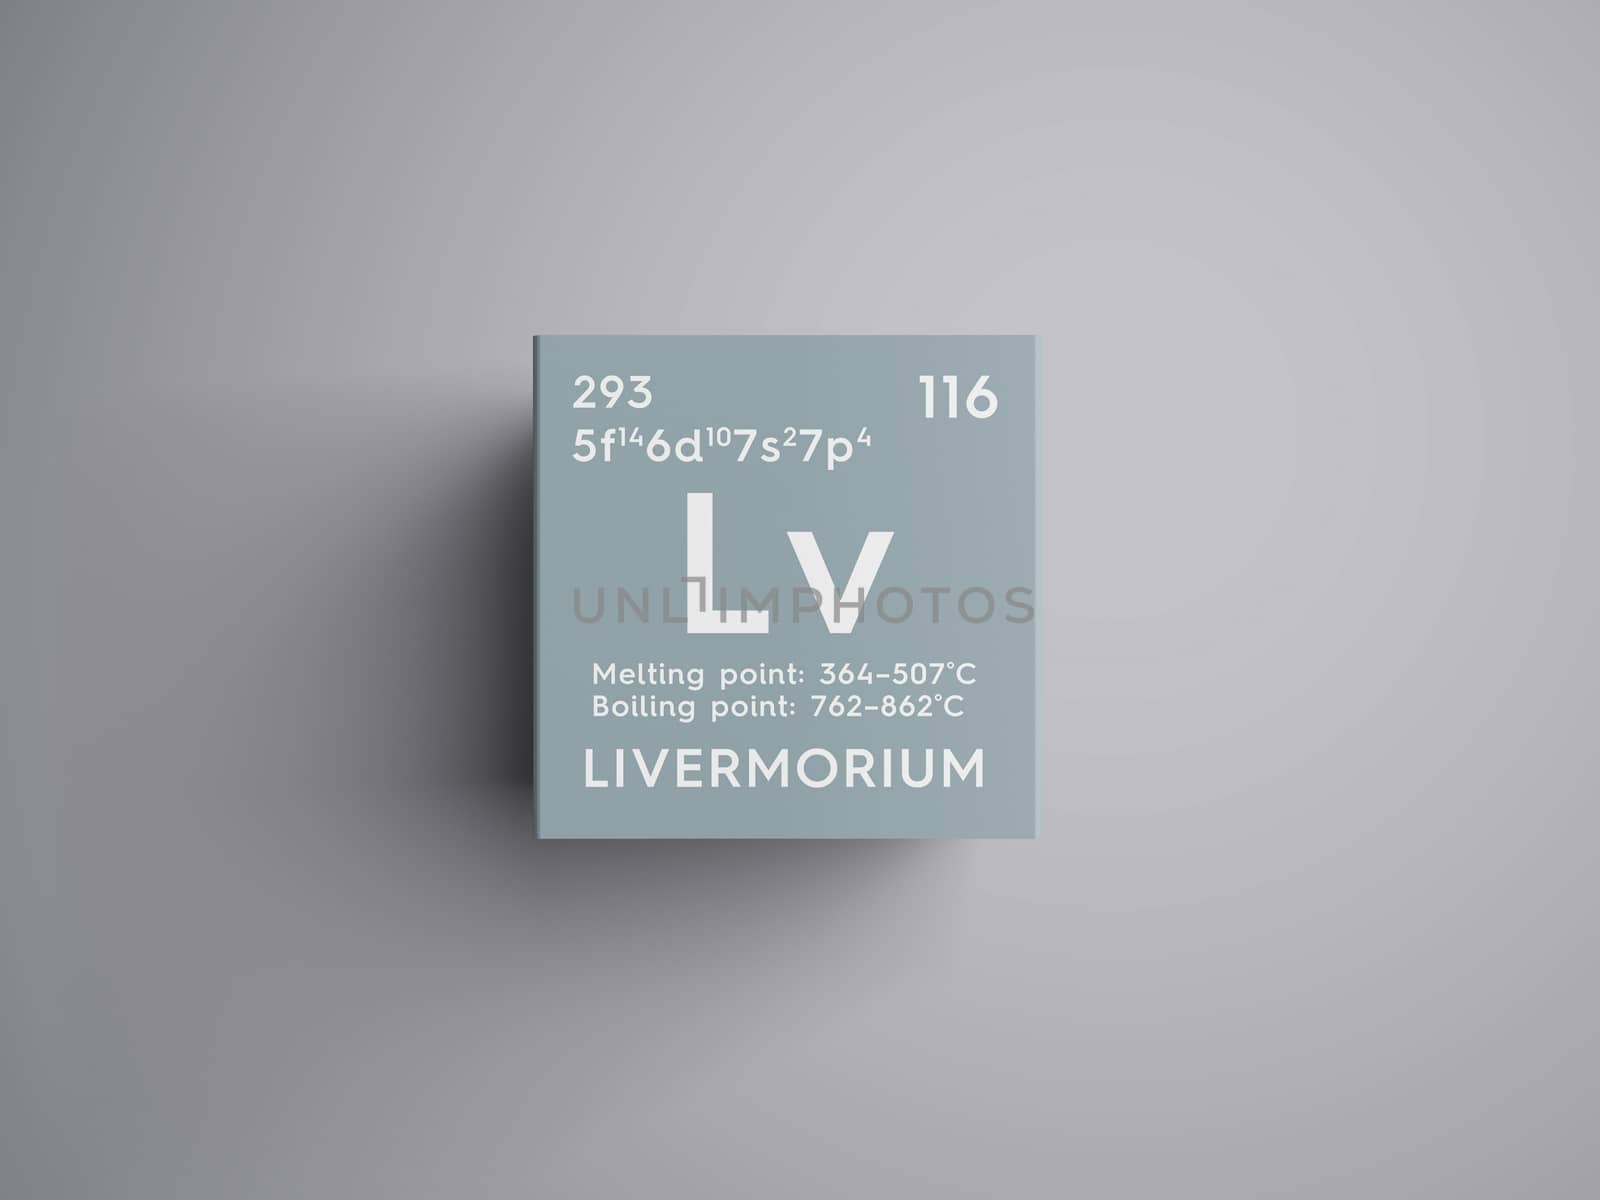 Livermorium. Post-transition metals. Chemical Element of Mendele by sanches812